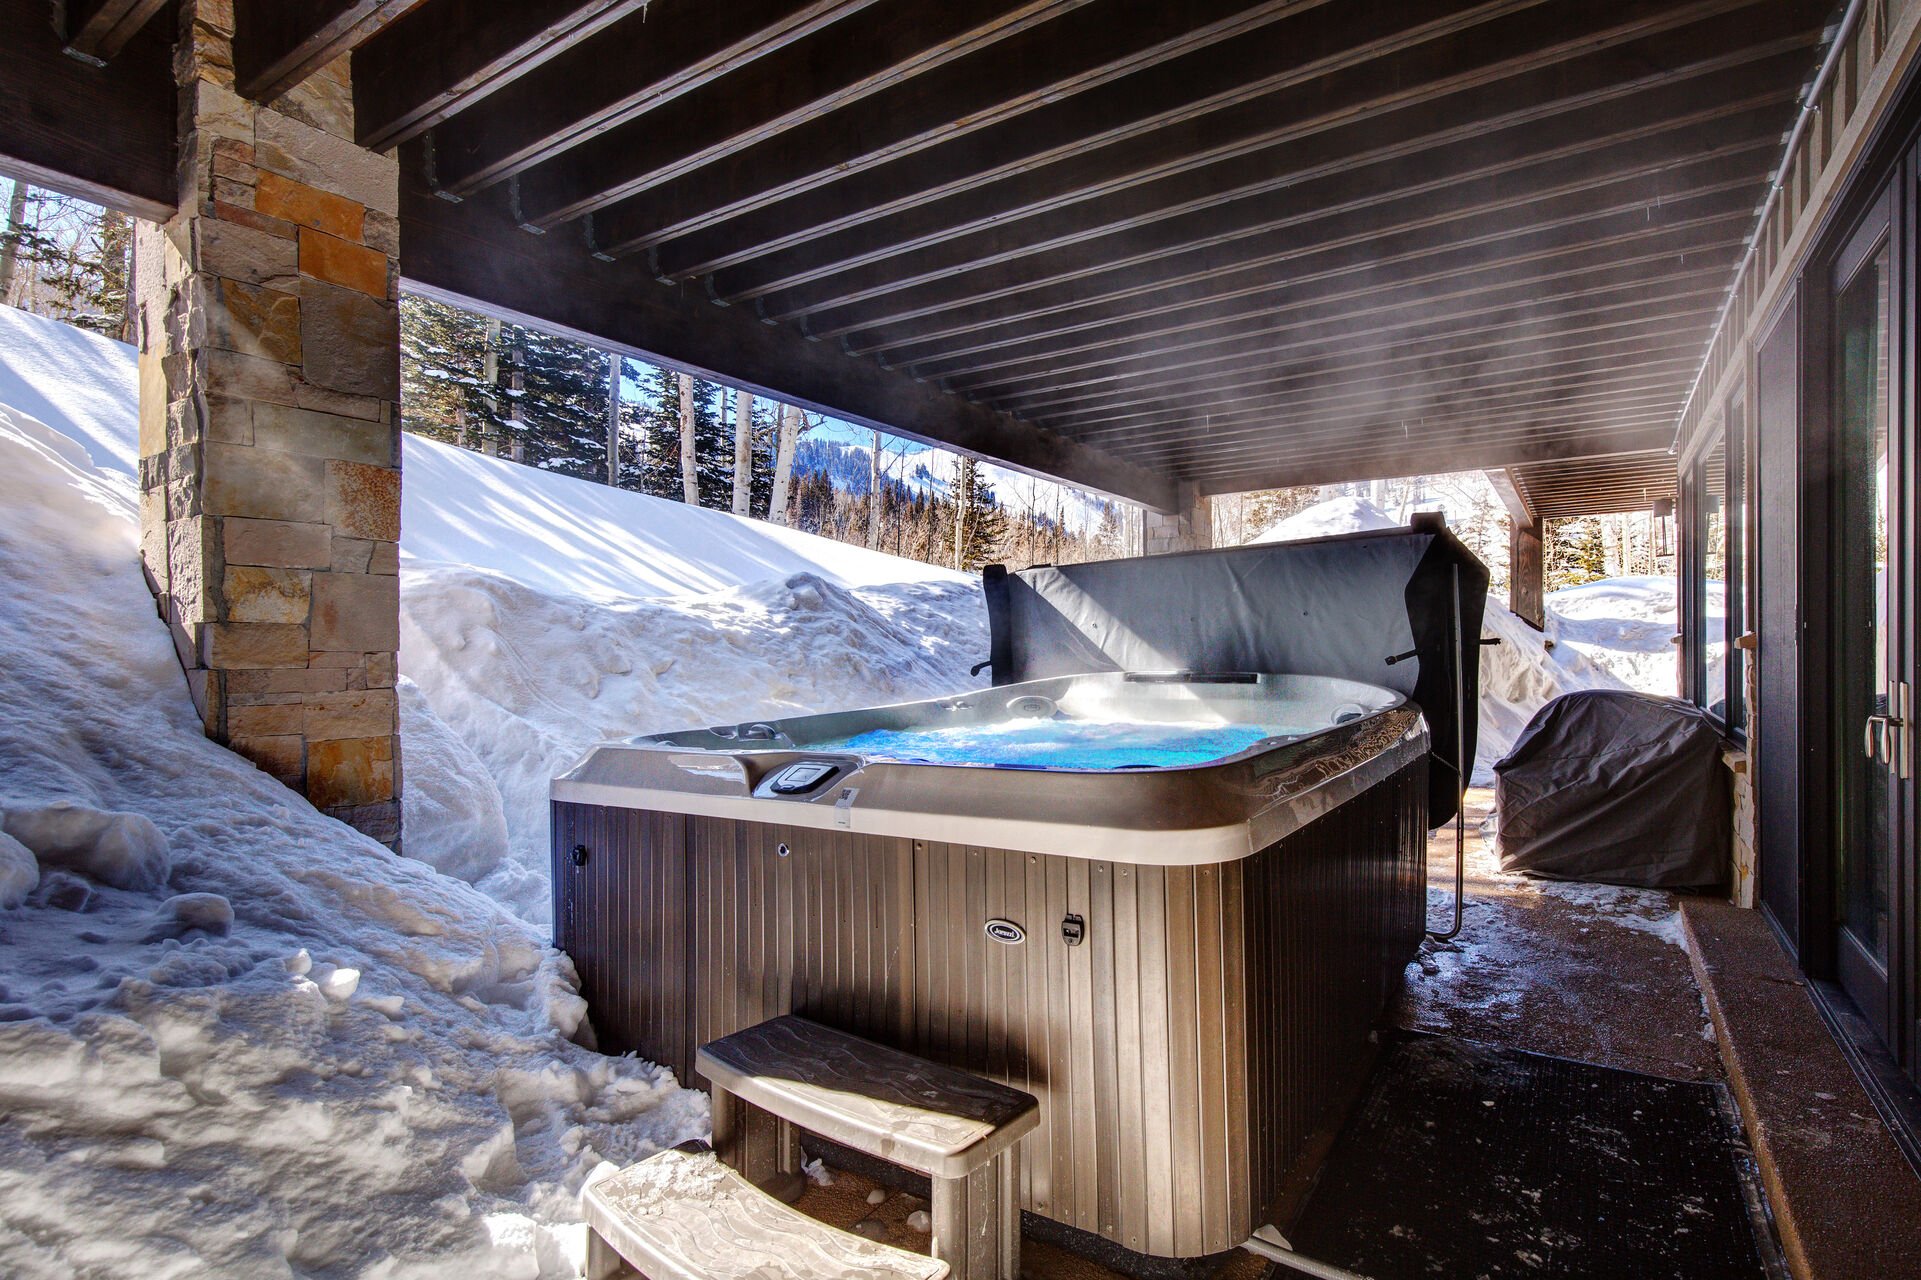 9-Person Hot Tub Just Added